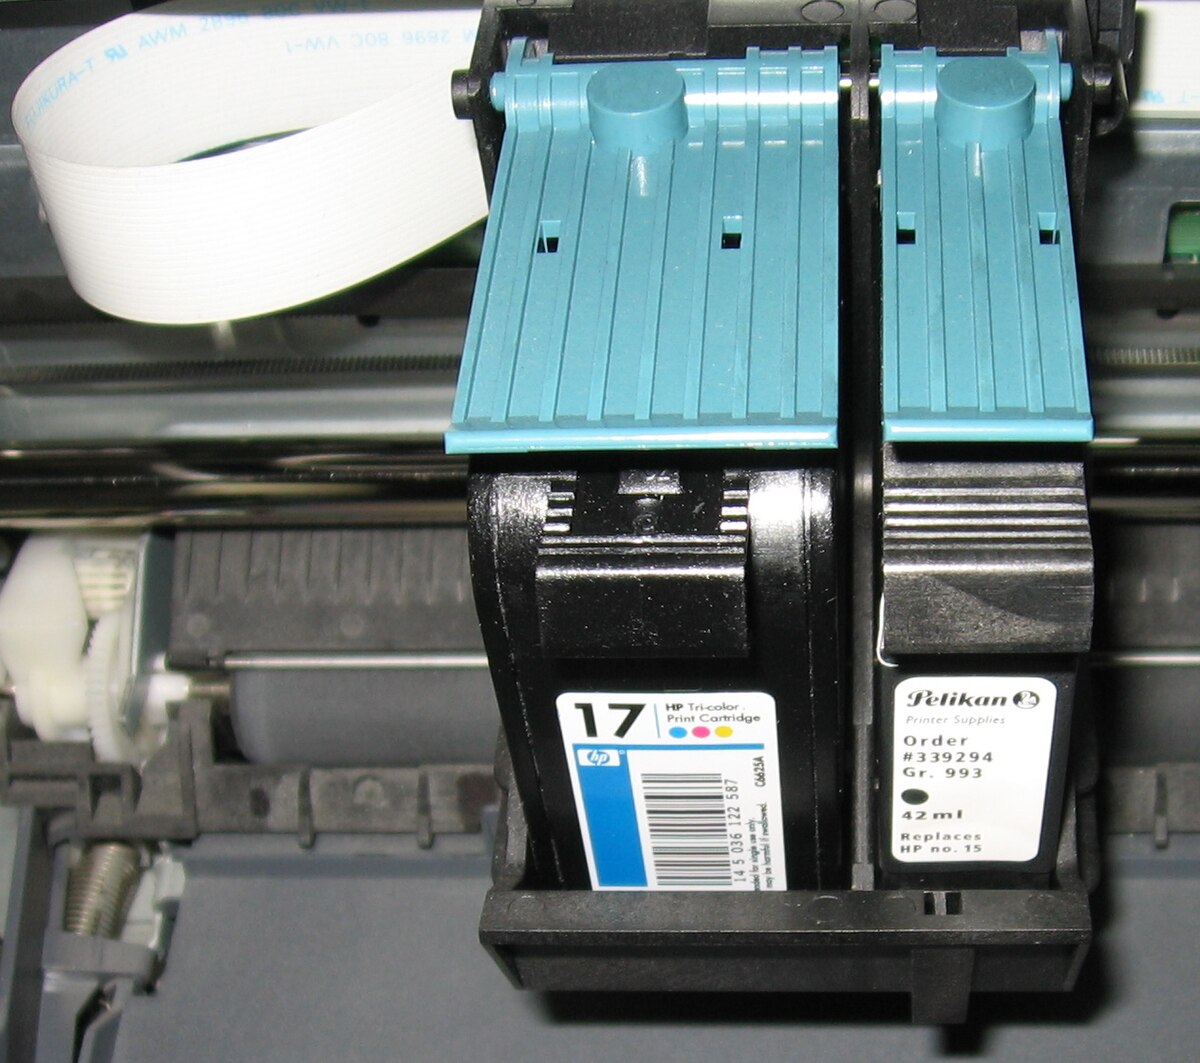 Consider removing printers that are outdated or incompatible with the current system.
Remove printers that are physically damaged and cannot be repaired.